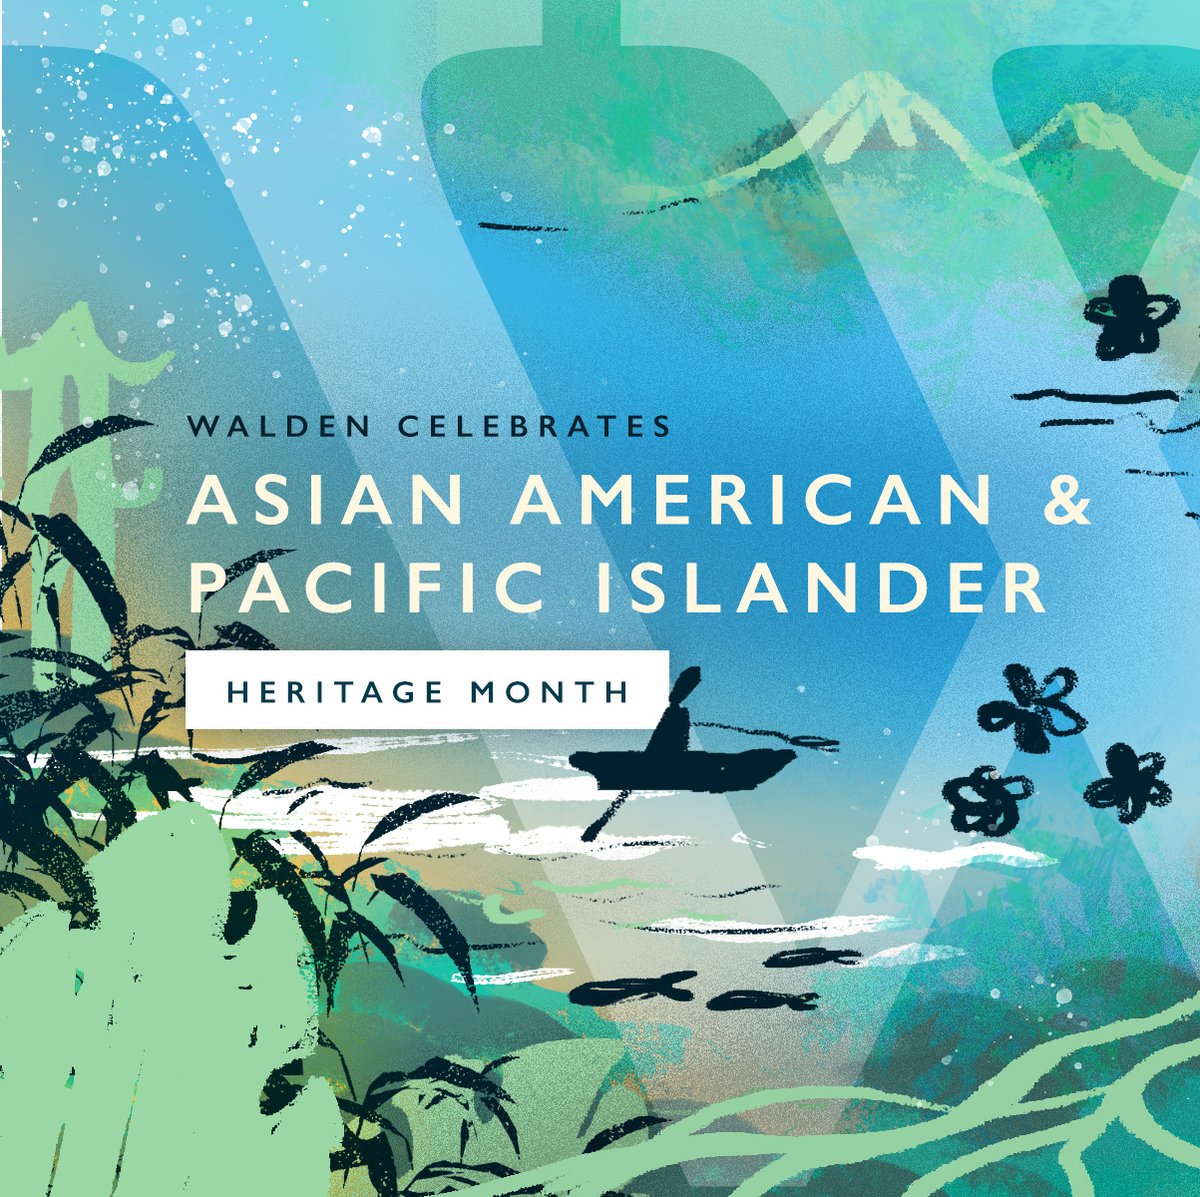 Together let’s honor the historical and cultural contributions of Asian Americans and Pacific Islanders to the U.S. and to our Walden community. Share how you plan to celebrate!